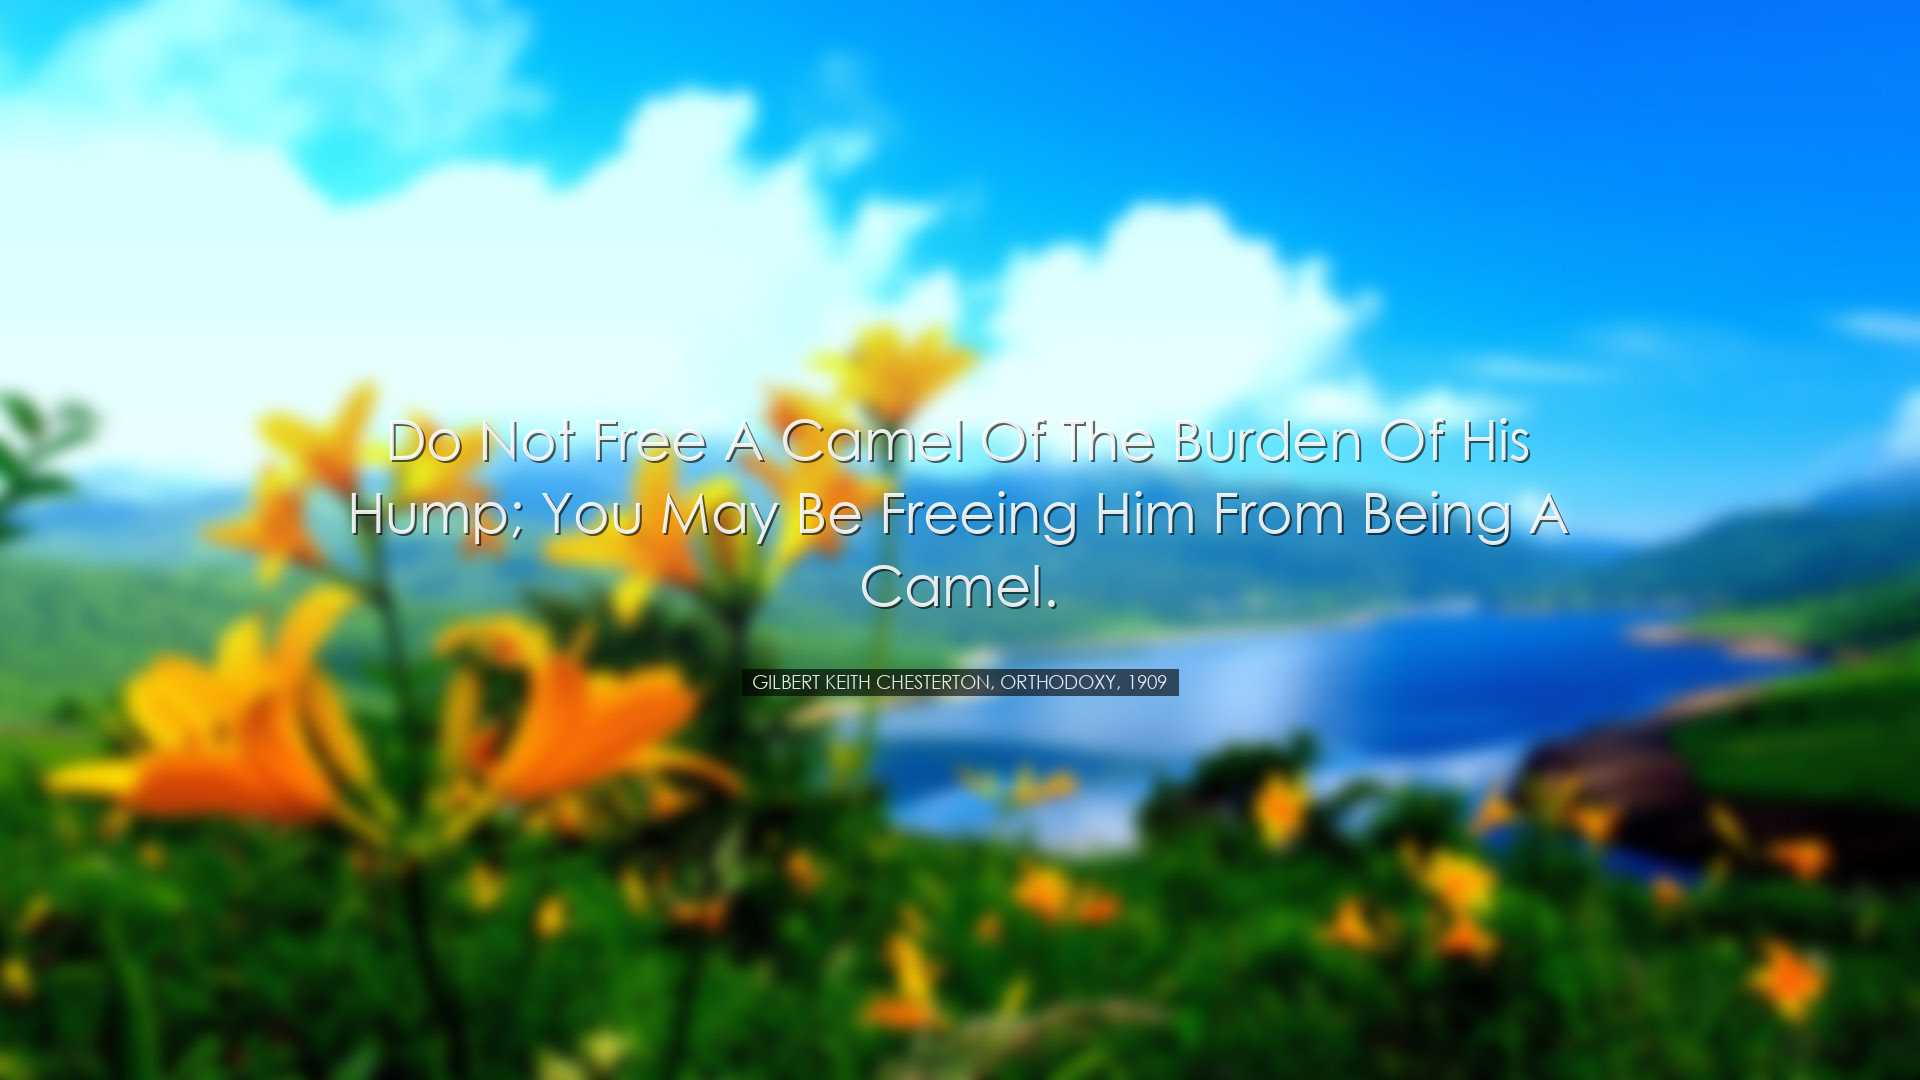 Do not free a camel of the burden of his hump; you may be freeing